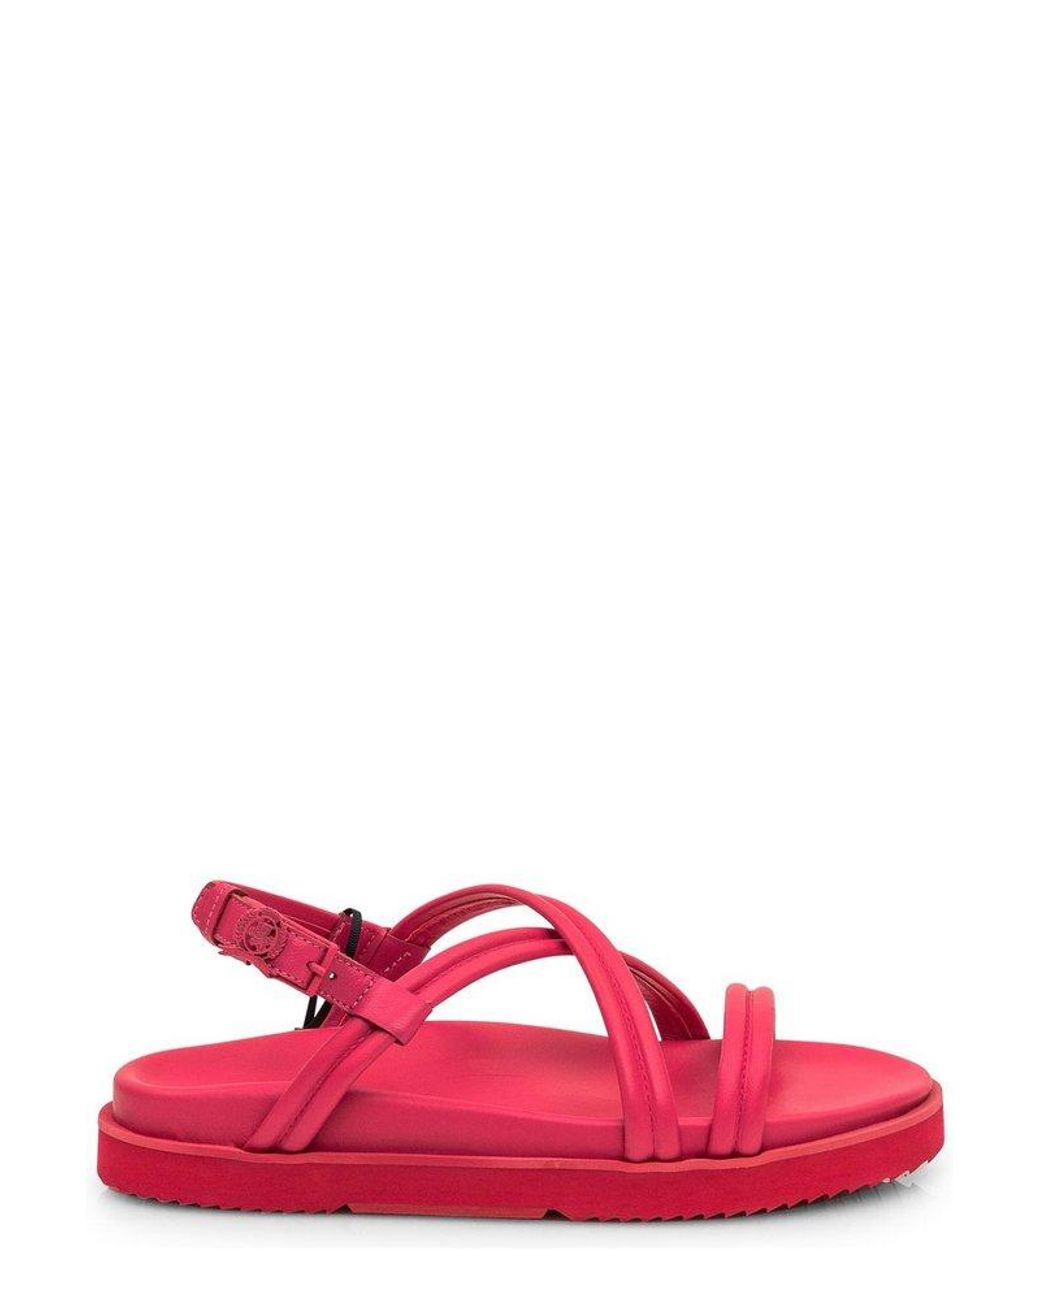 Tommy Hilfiger Crest Buckle Sandals in Pink | Lyst